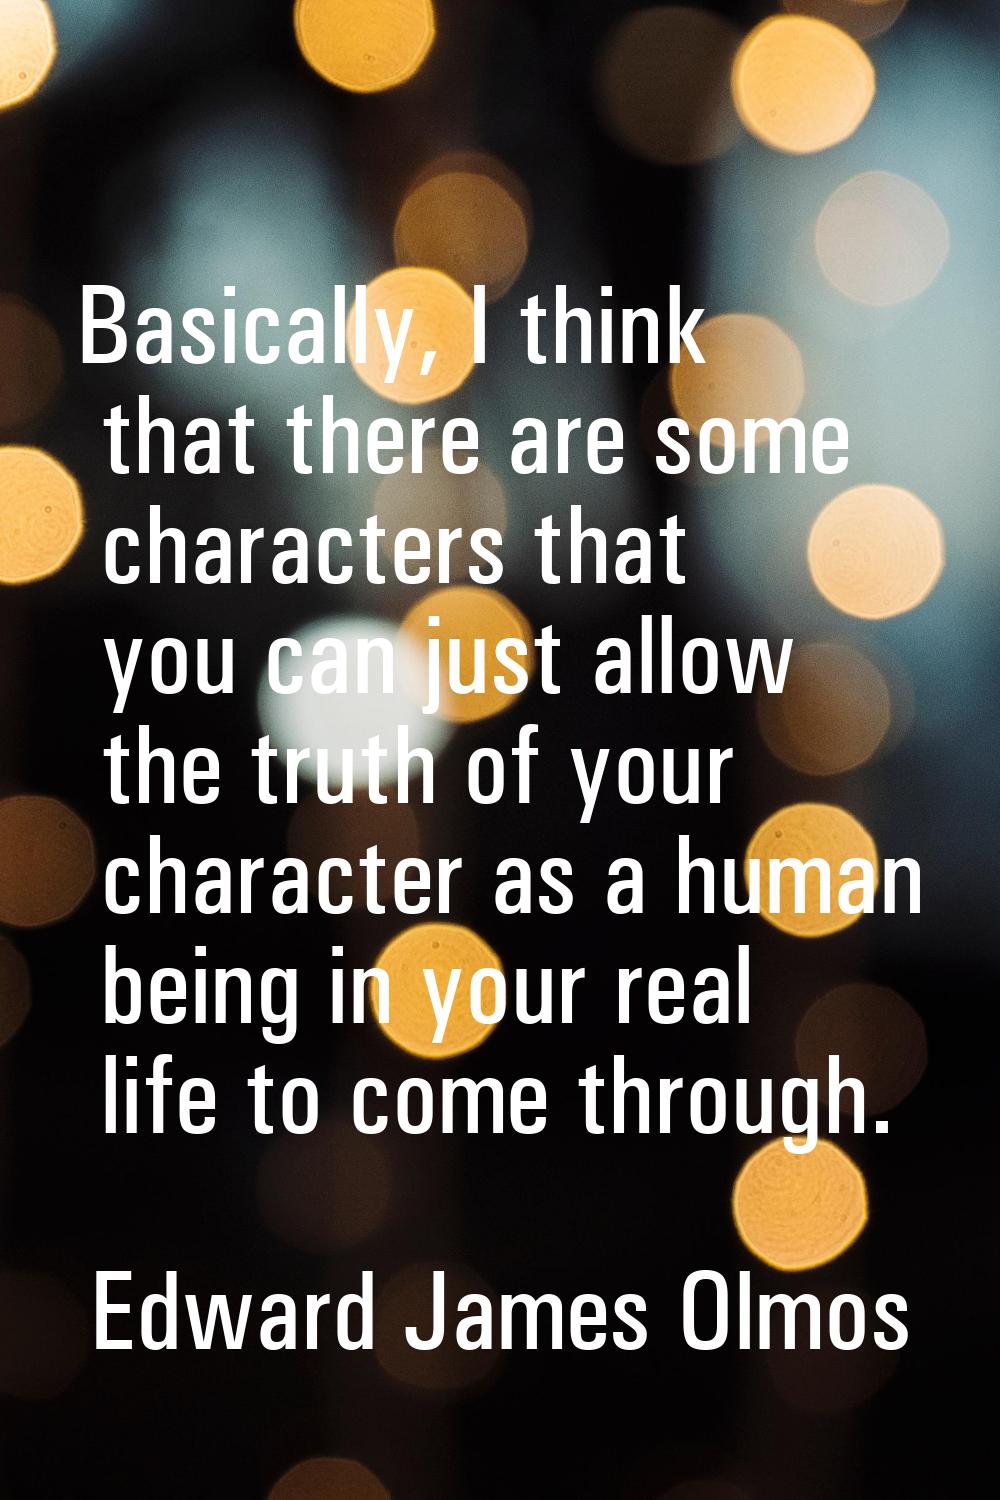 Basically, I think that there are some characters that you can just allow the truth of your charact